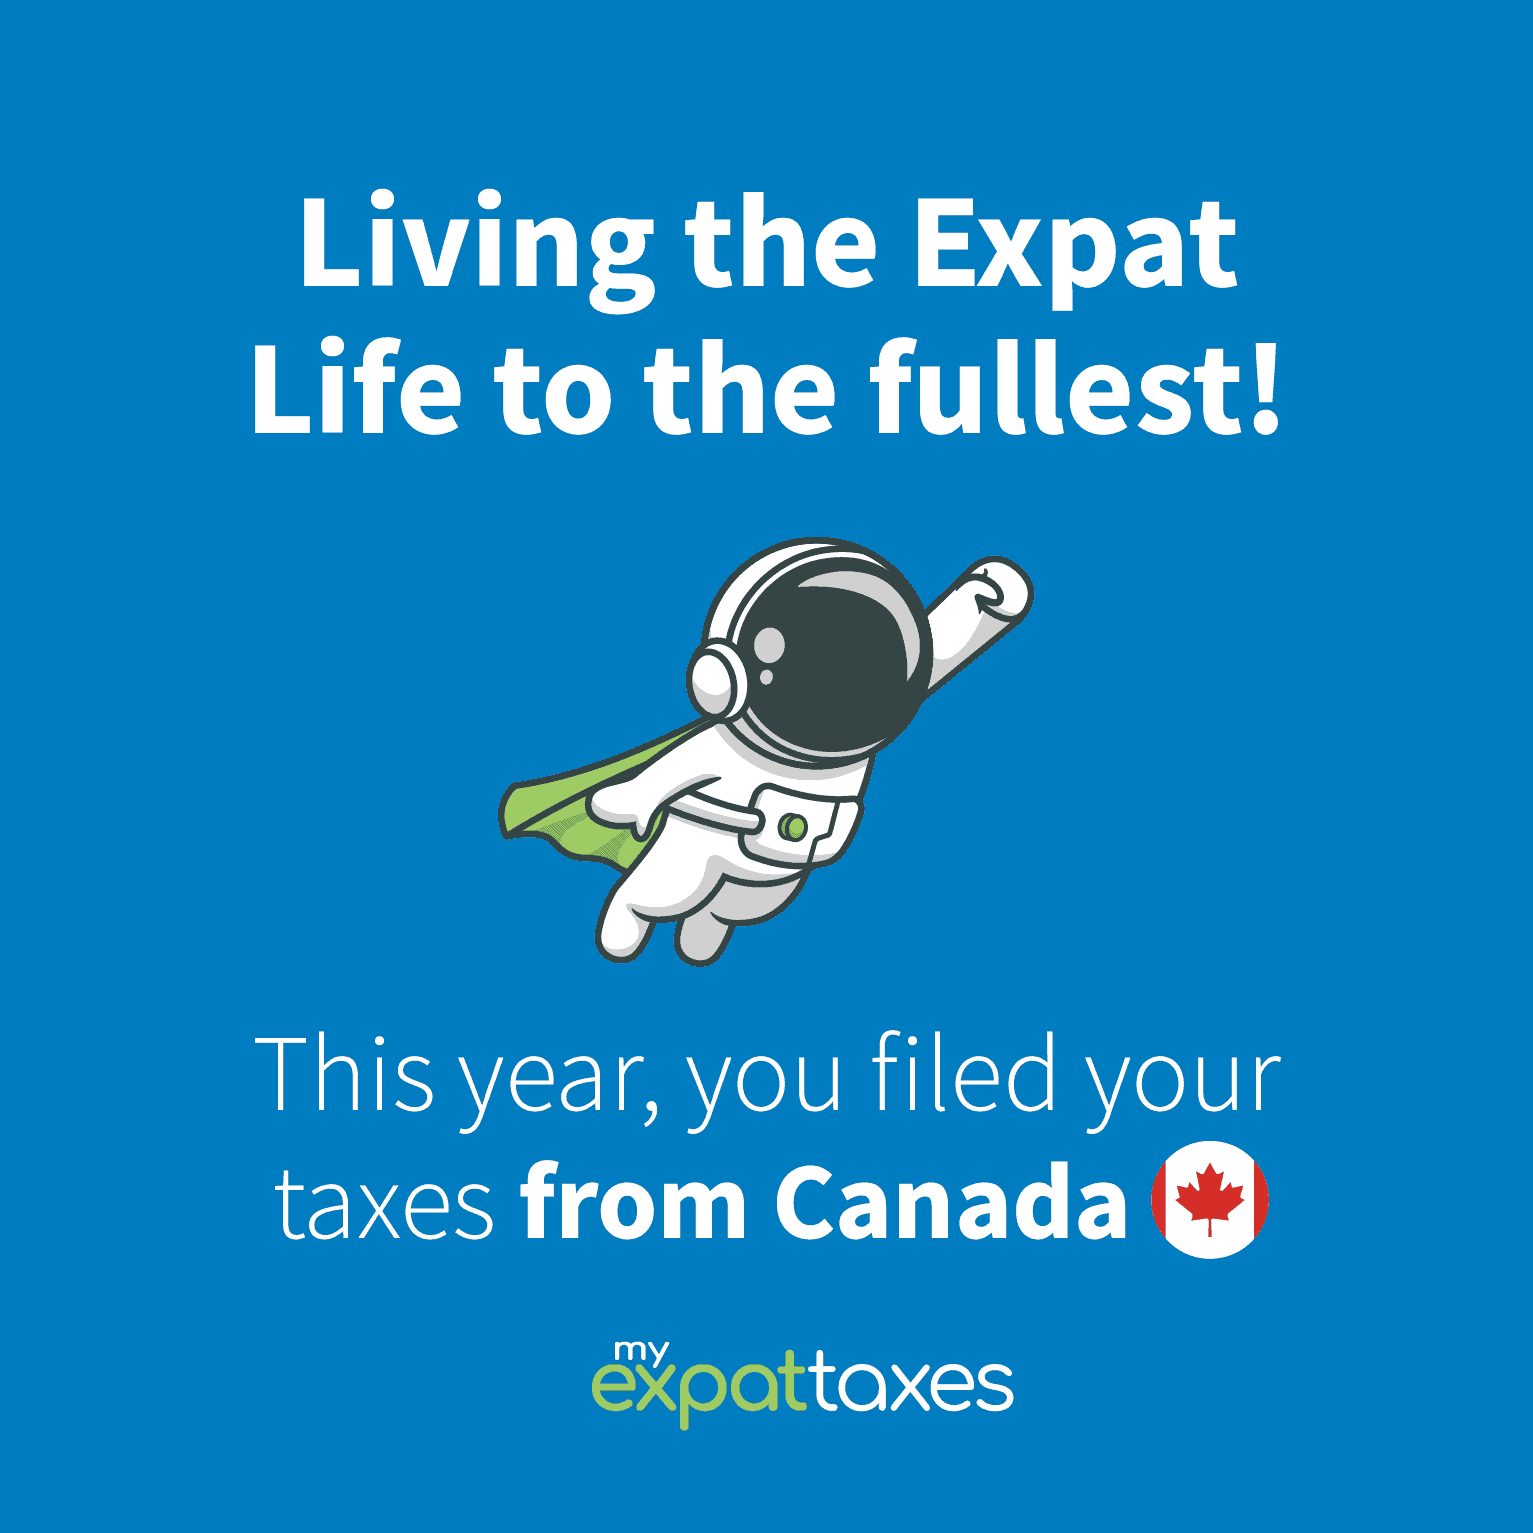 Living the Expat life to the fullest! This year, you filed your taxes from Canada.